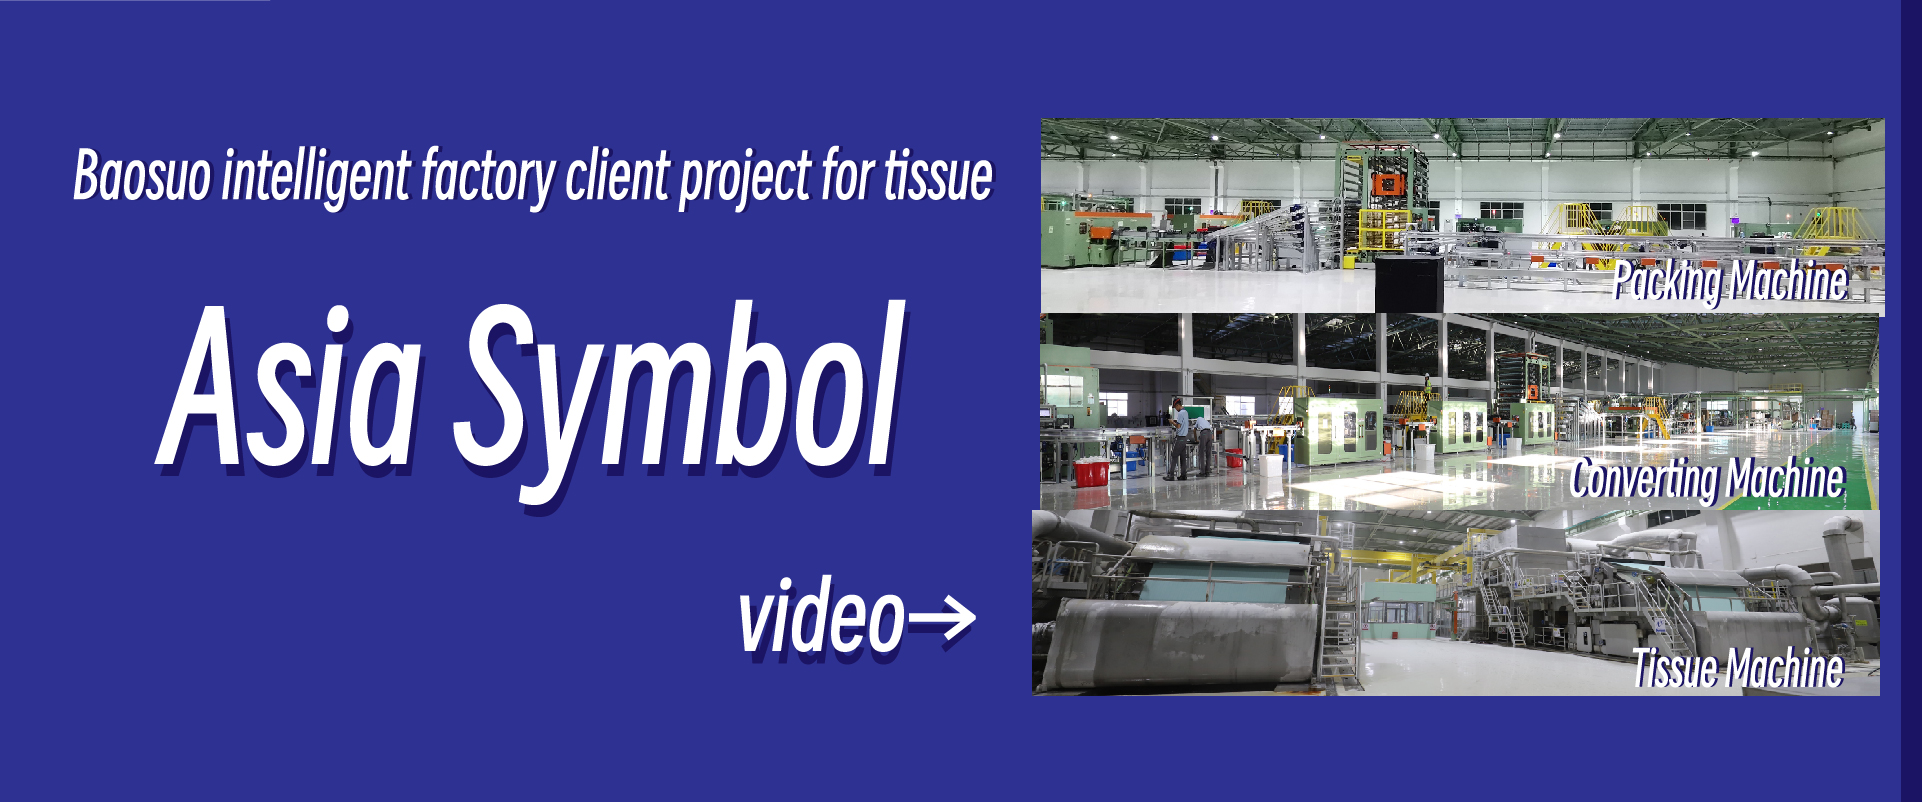 Baosuo intelligent factory client project for tissue——Asia Symbol